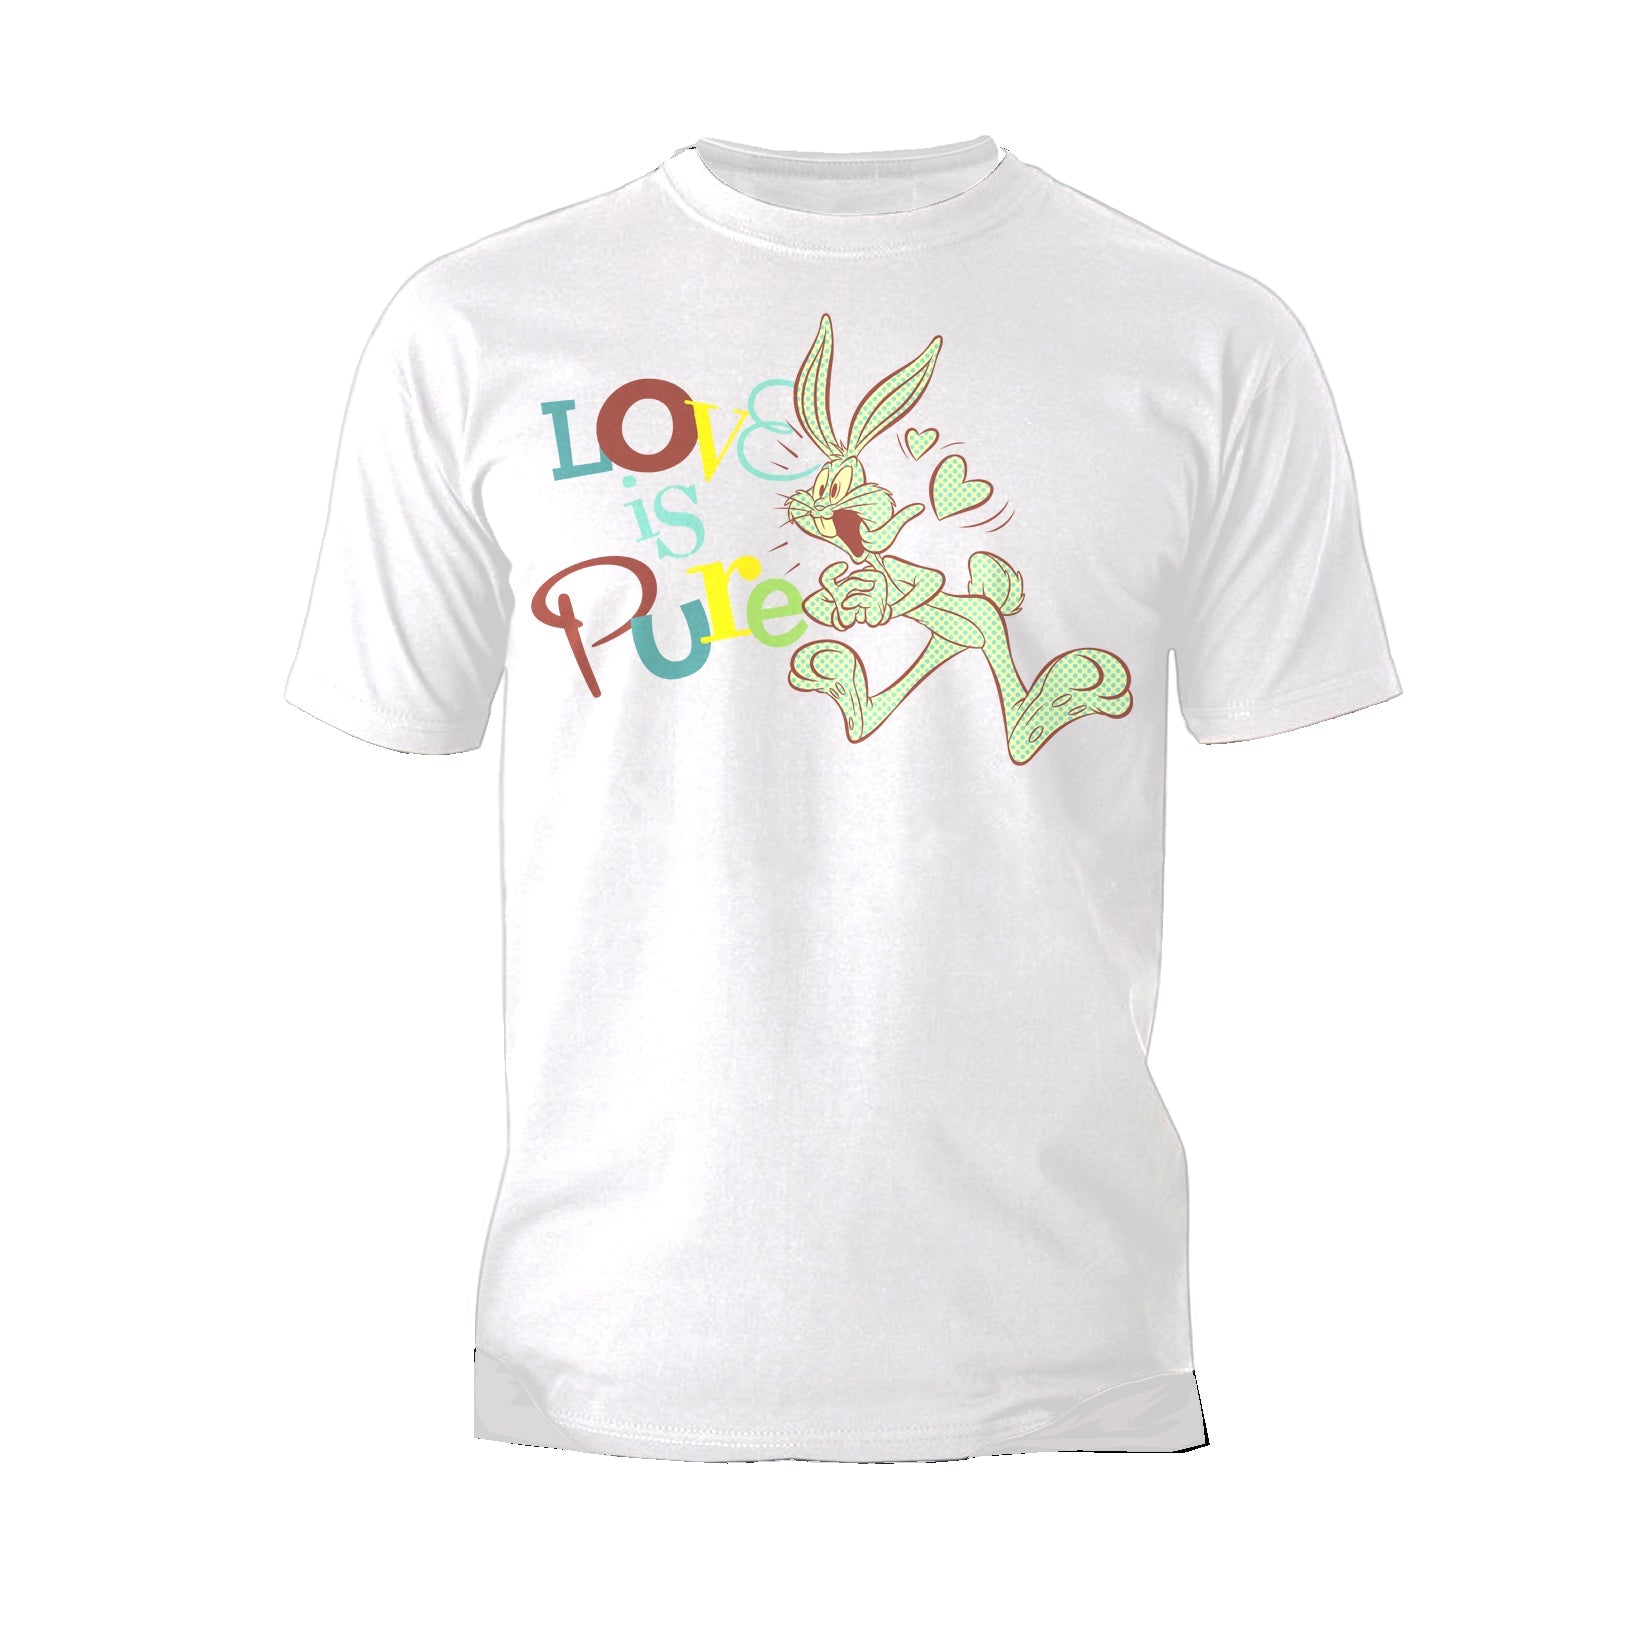 Looney Tunes Bugs Bunny Retro Love Pure Official Men's T-shirt